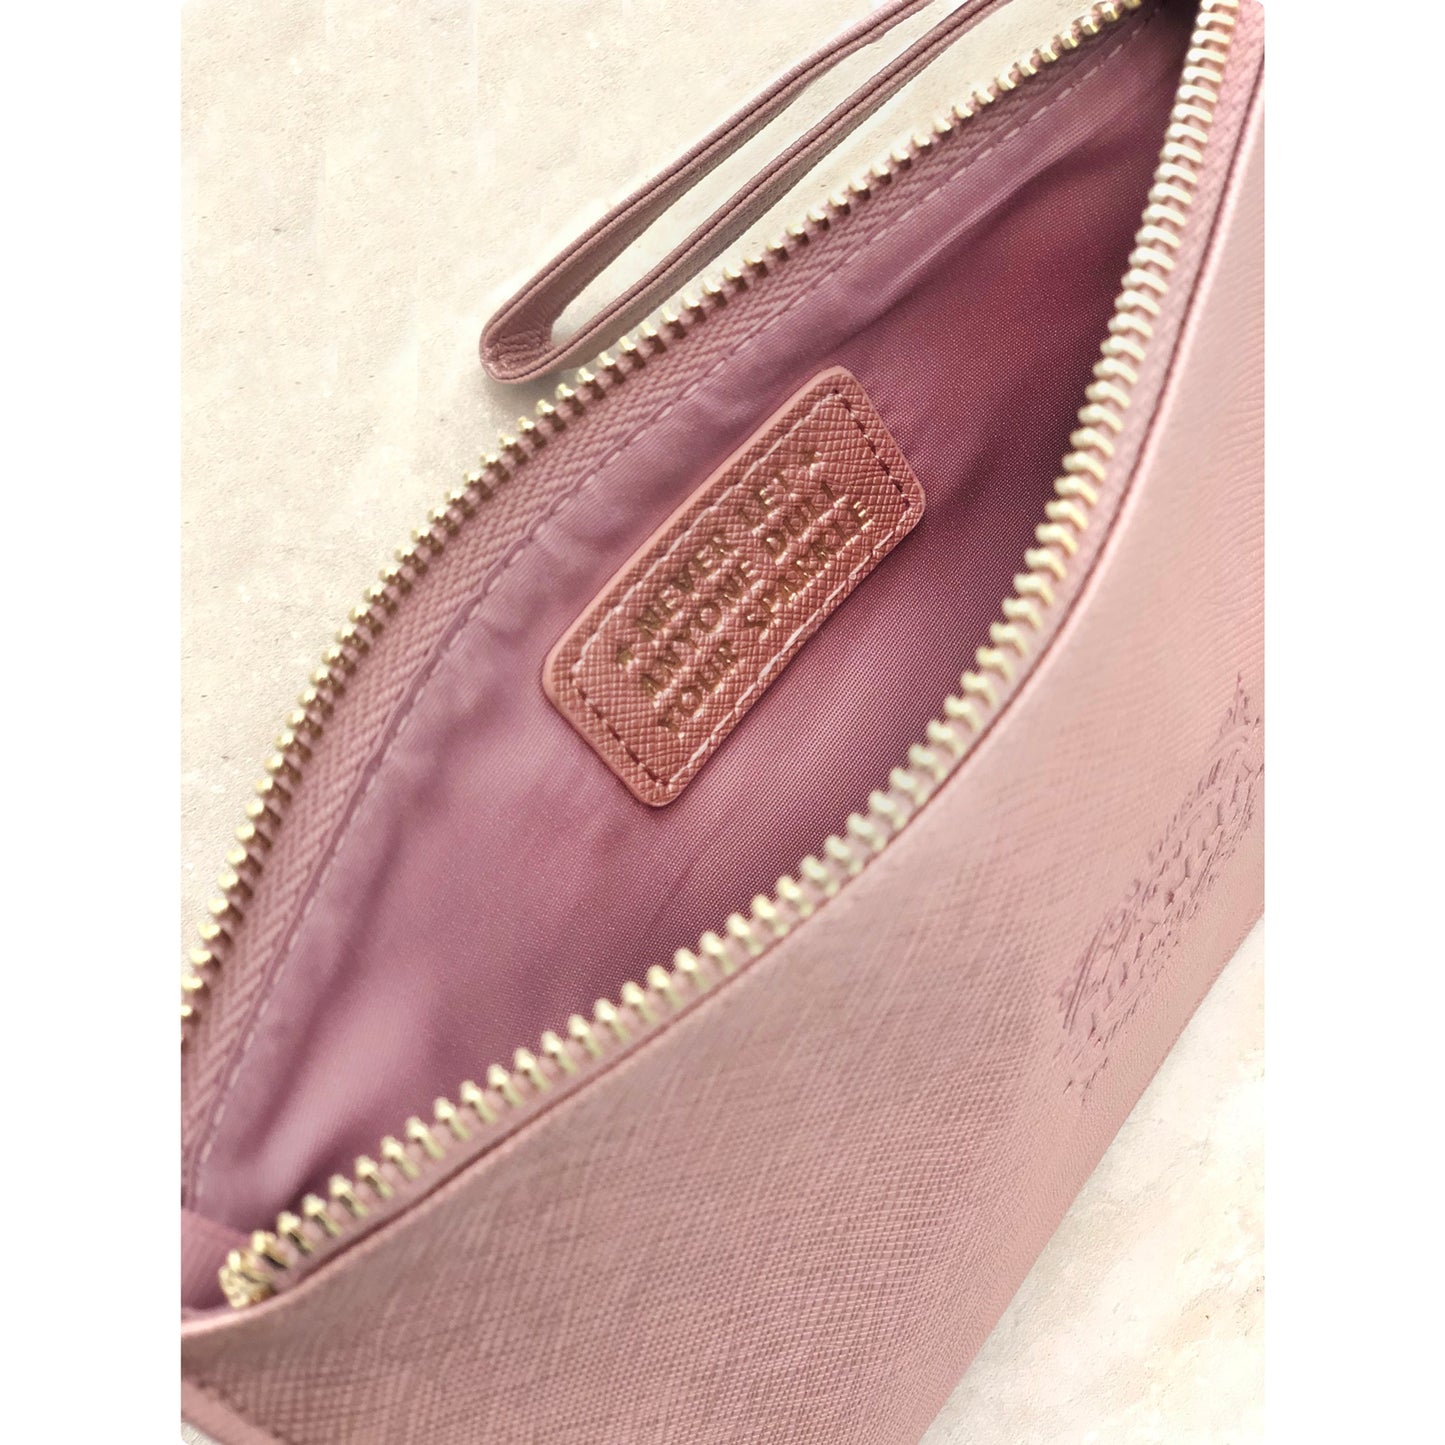 Clutch Bag With Handle & Embossed Text "Stephanie"